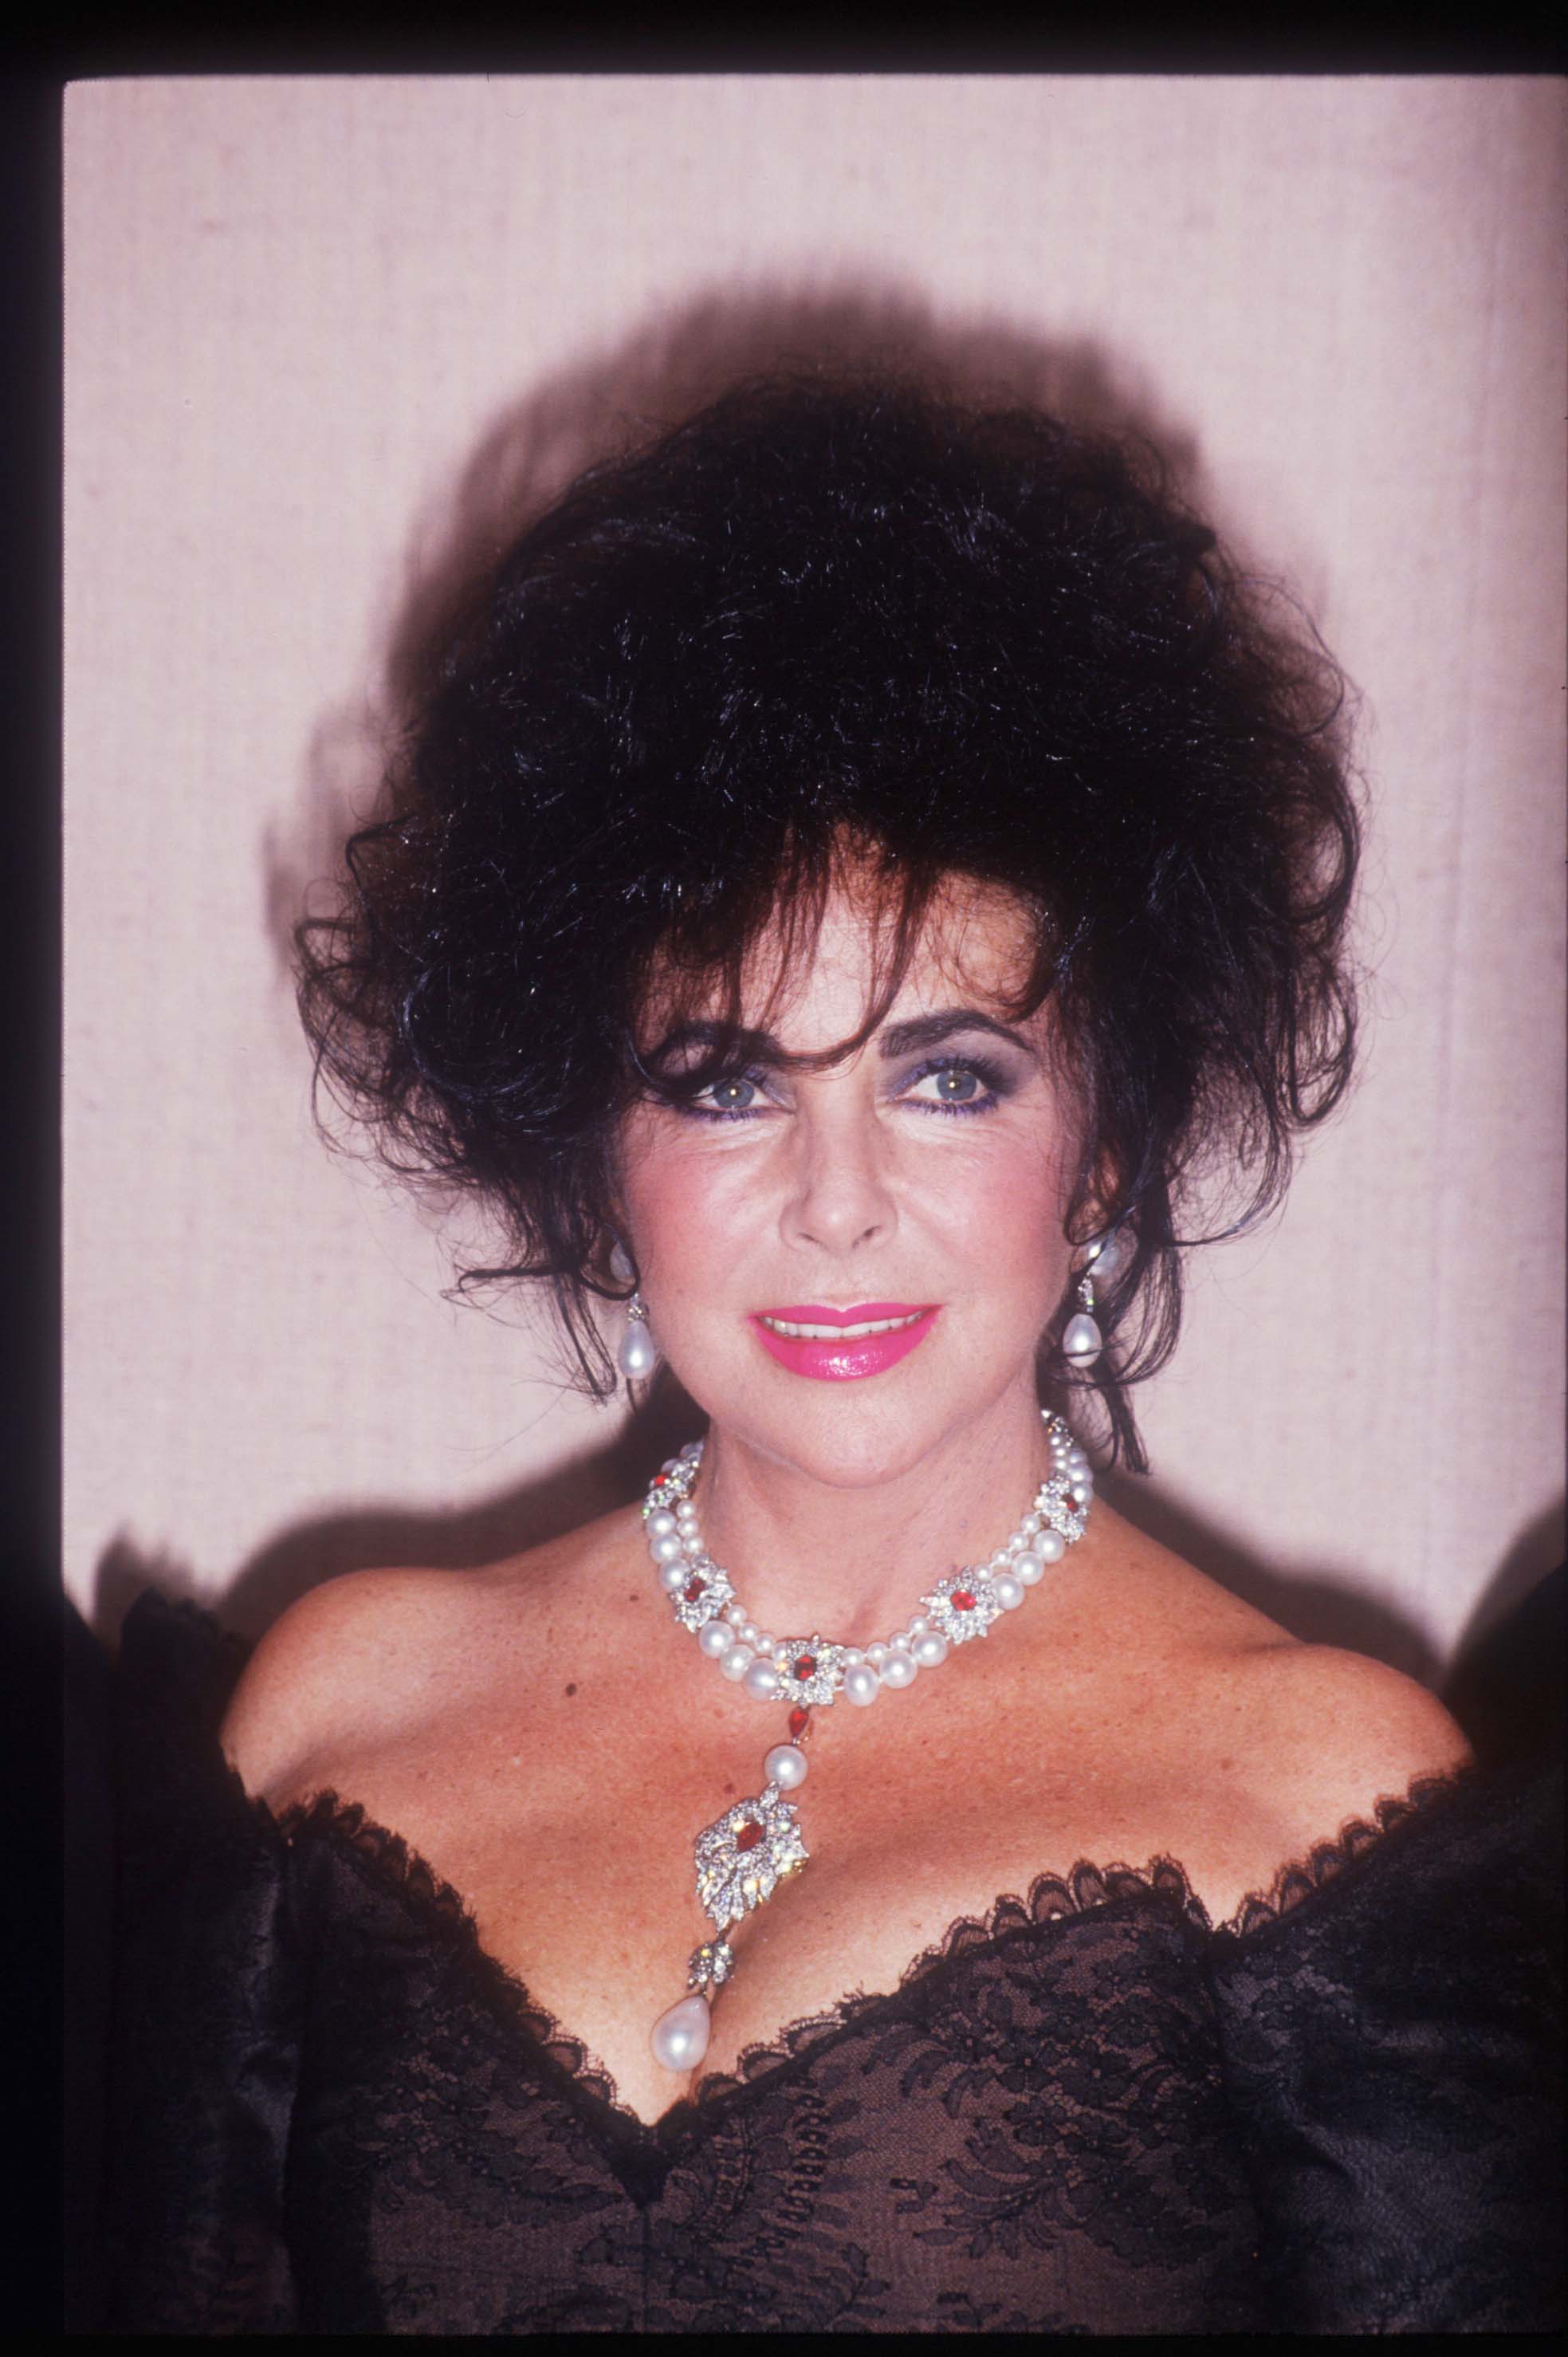  Actress Elizabeth Taylor stands January 19, 1992 in Los Angeles, CA. Taylor became a child star after her appearance in "National Velvet" and later won Academy Awards for her performances in "Butterfield 8" and " Who's Afraid of Virginia Woolf?" | Source: Getty Images